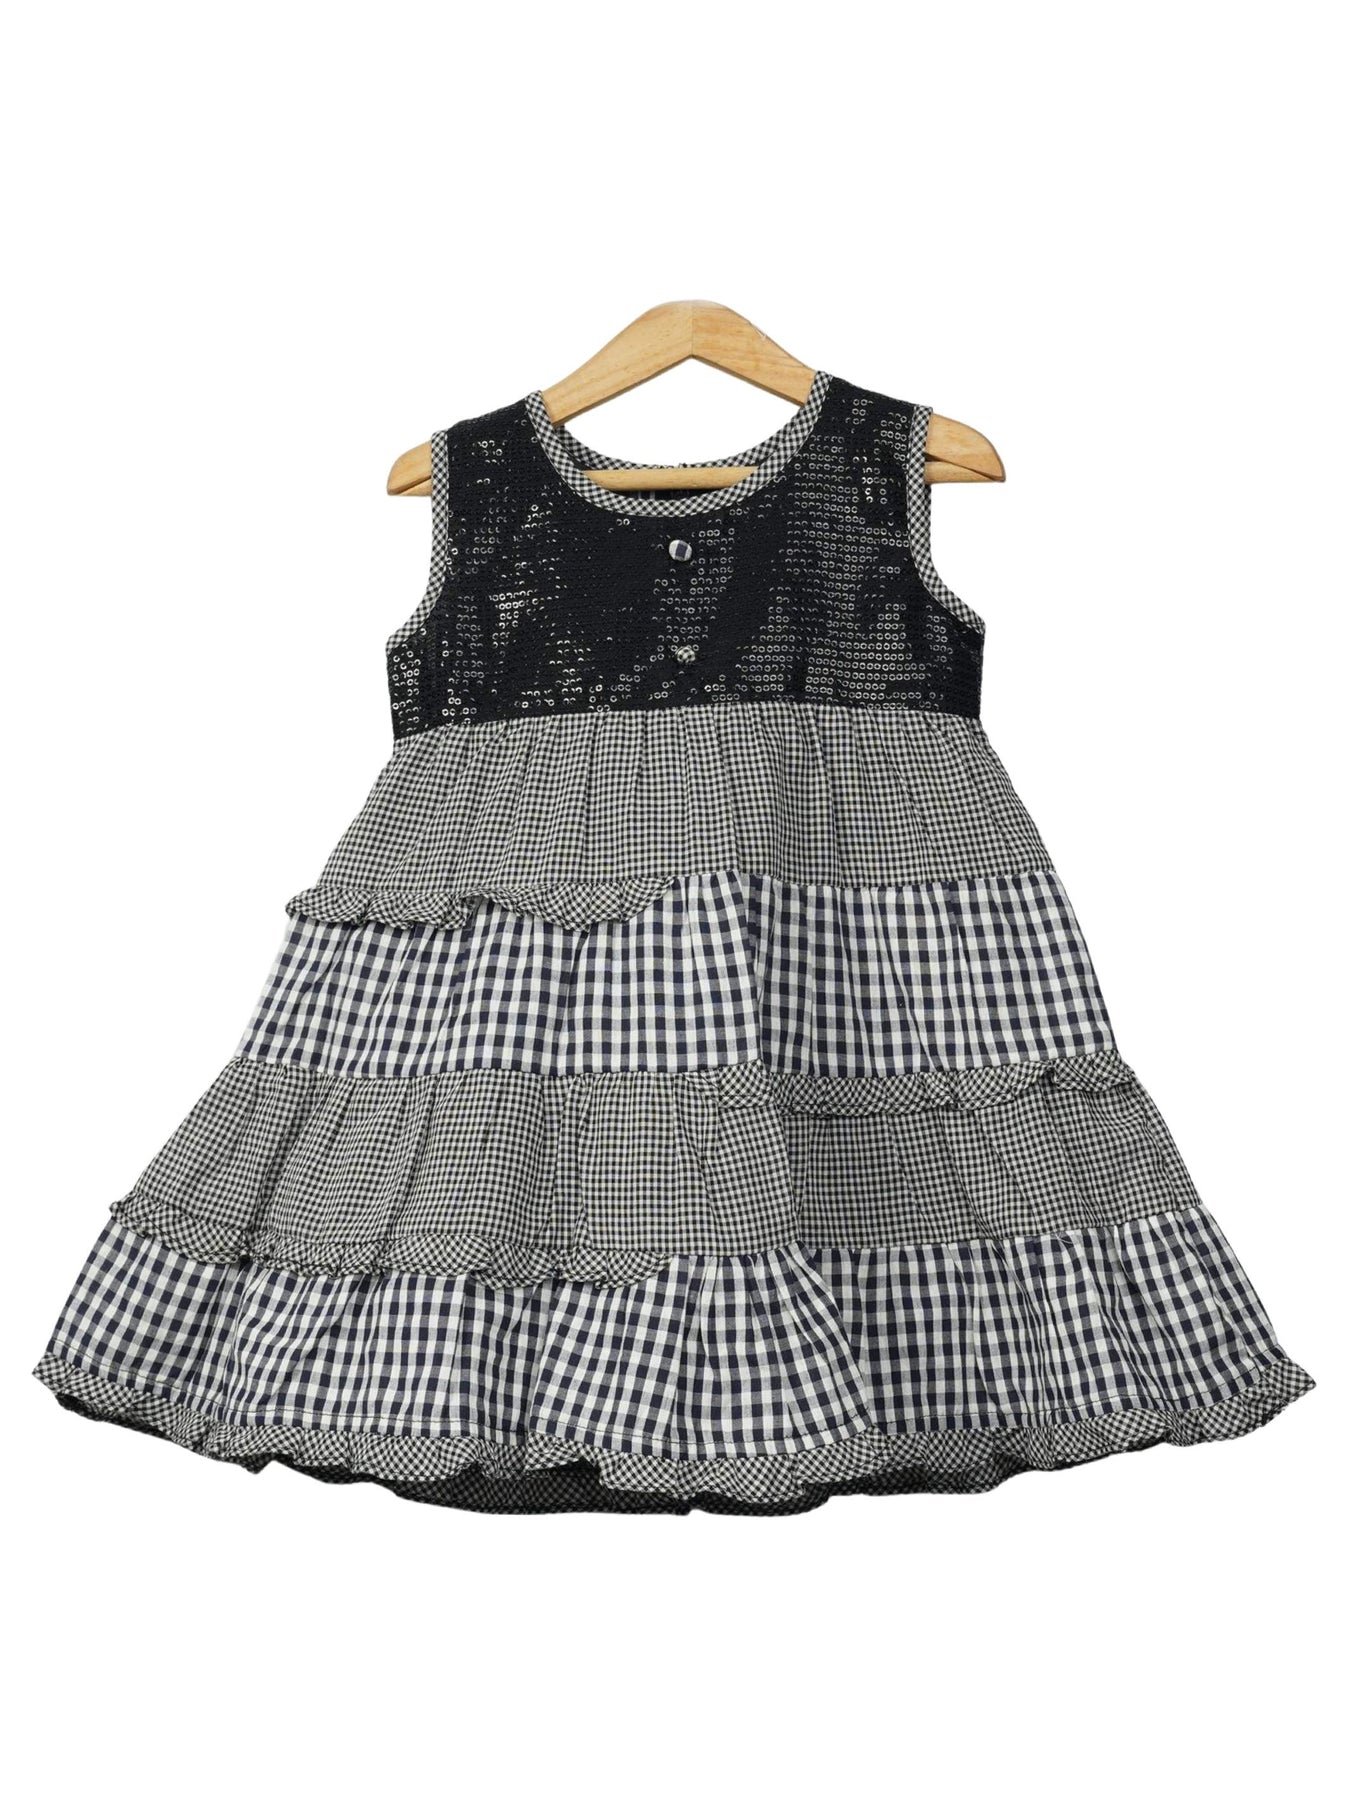 Buy online Multi Colored Cotton Frock from girls for Women by Lil Drama for  999 at 0 off  2023 Limeroadcom